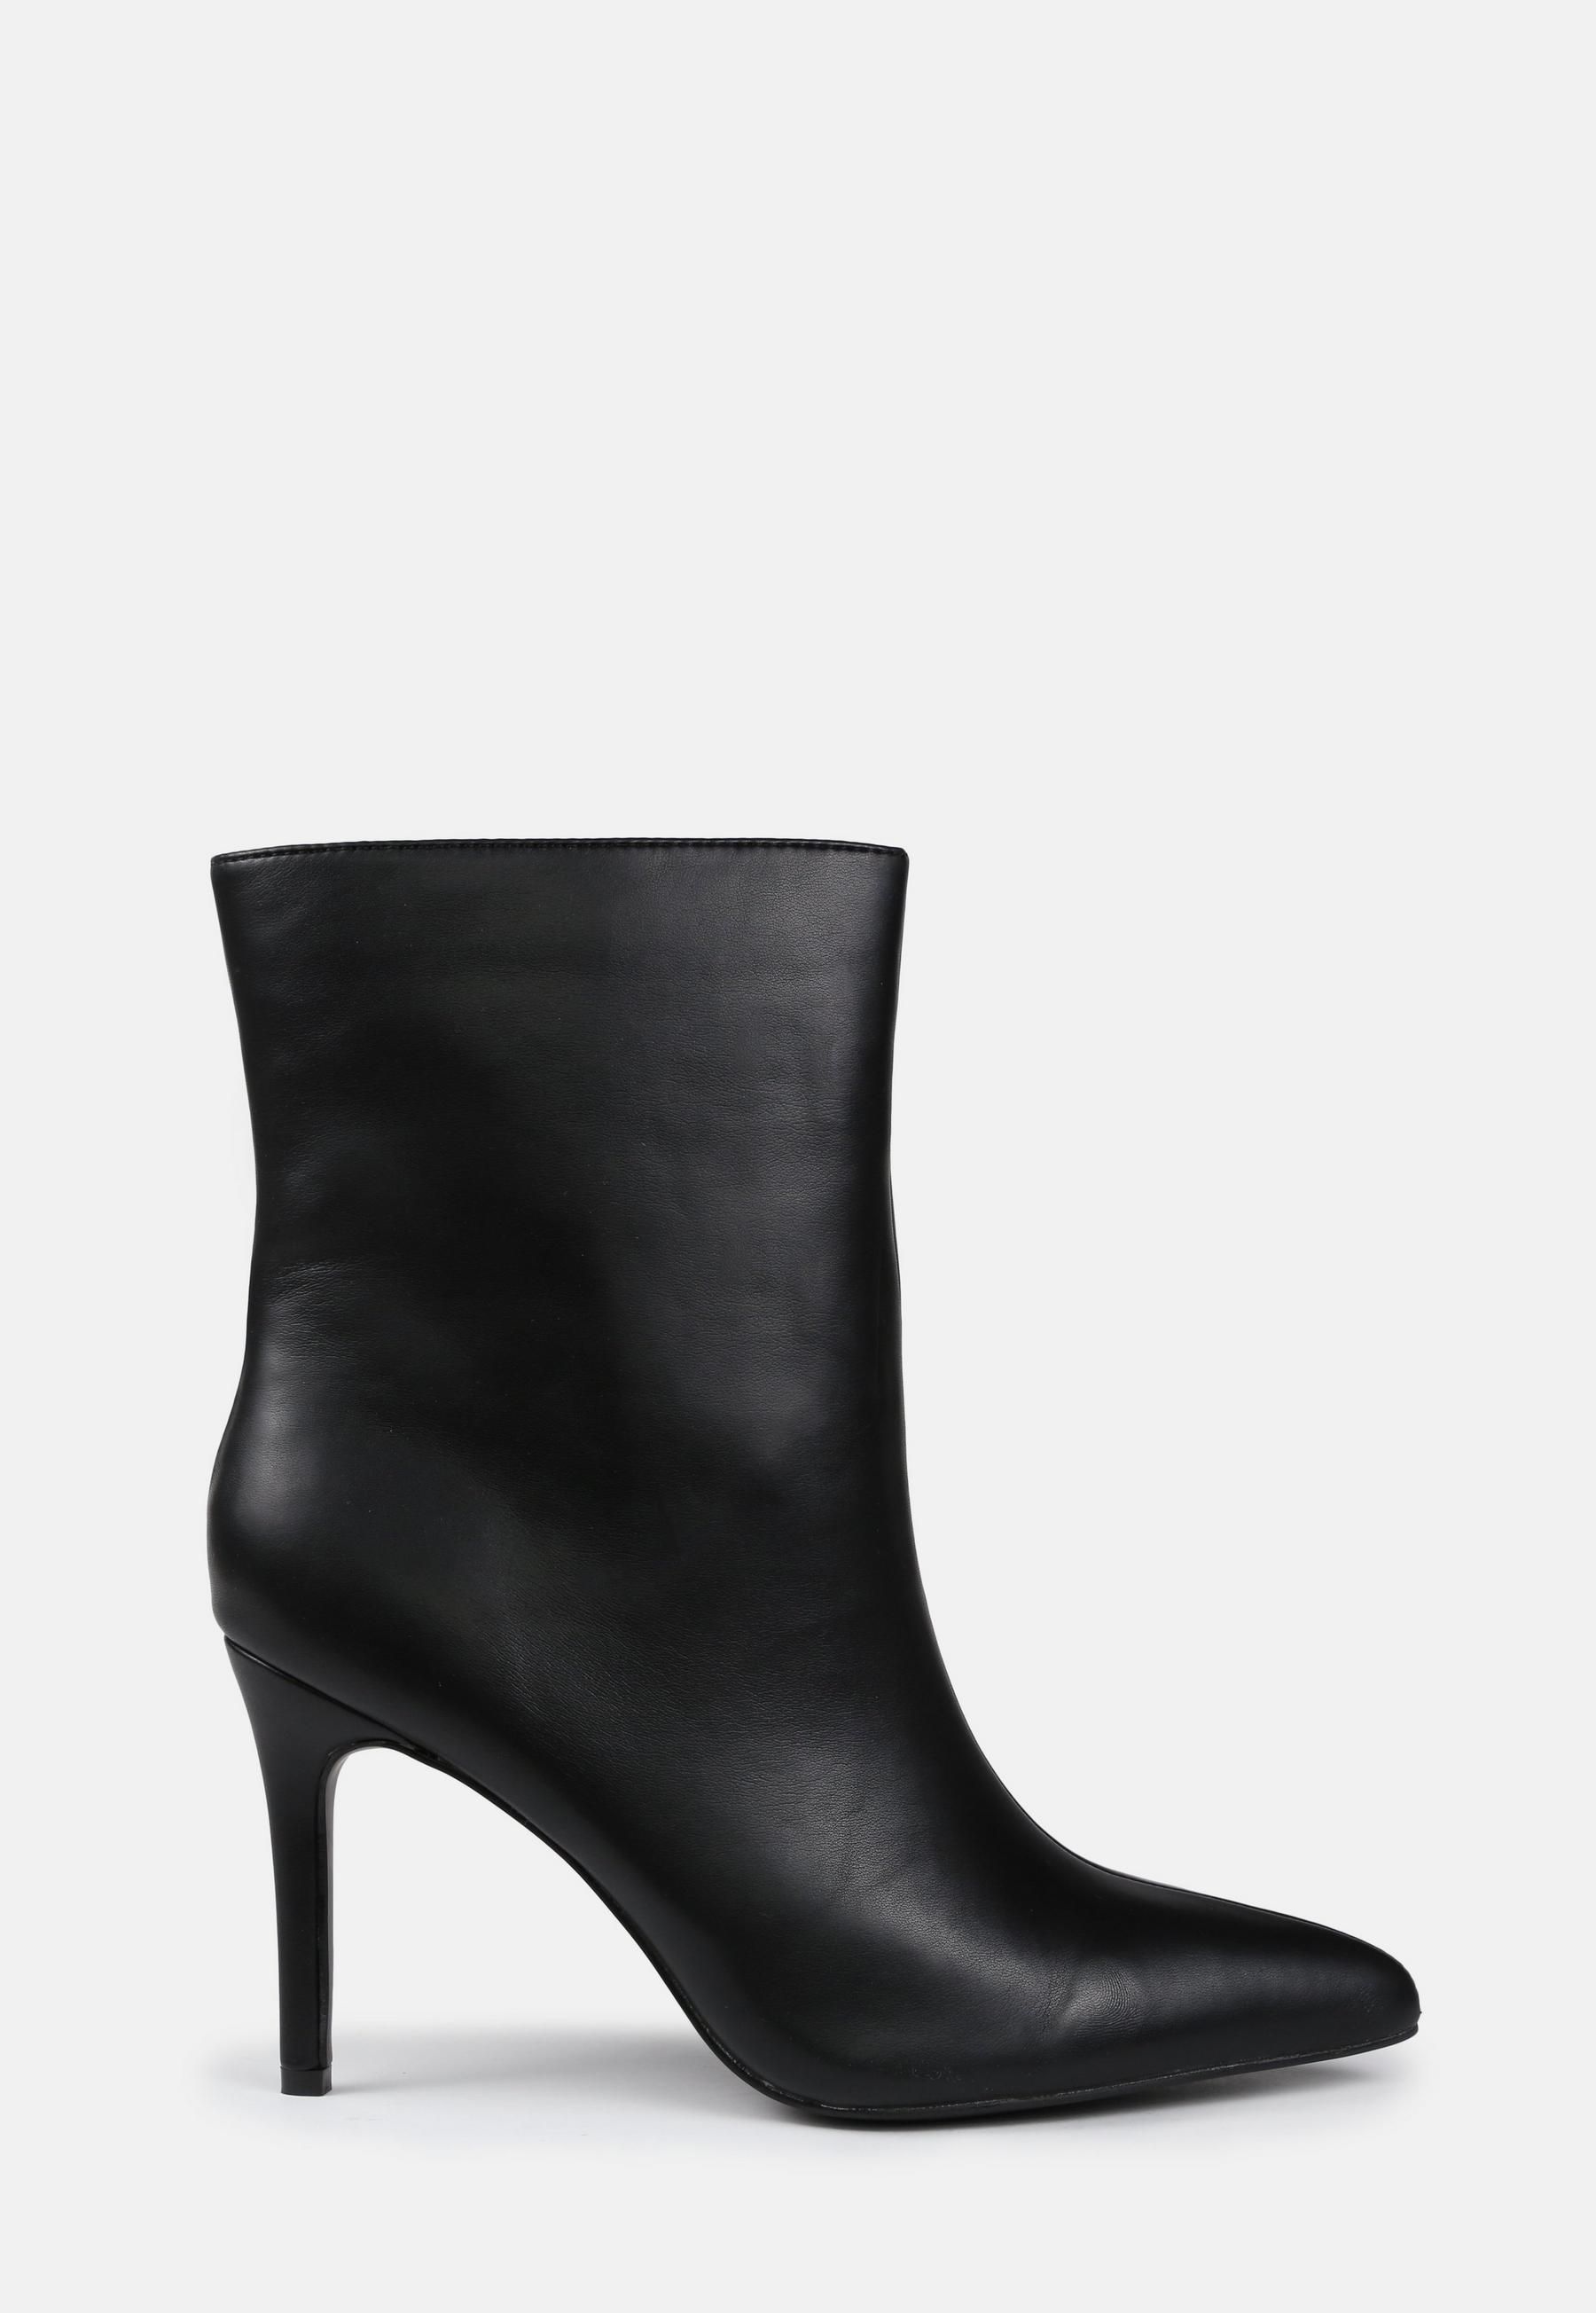 Missguided - Black Mid Heel Ankle Boots | Missguided (US & CA)